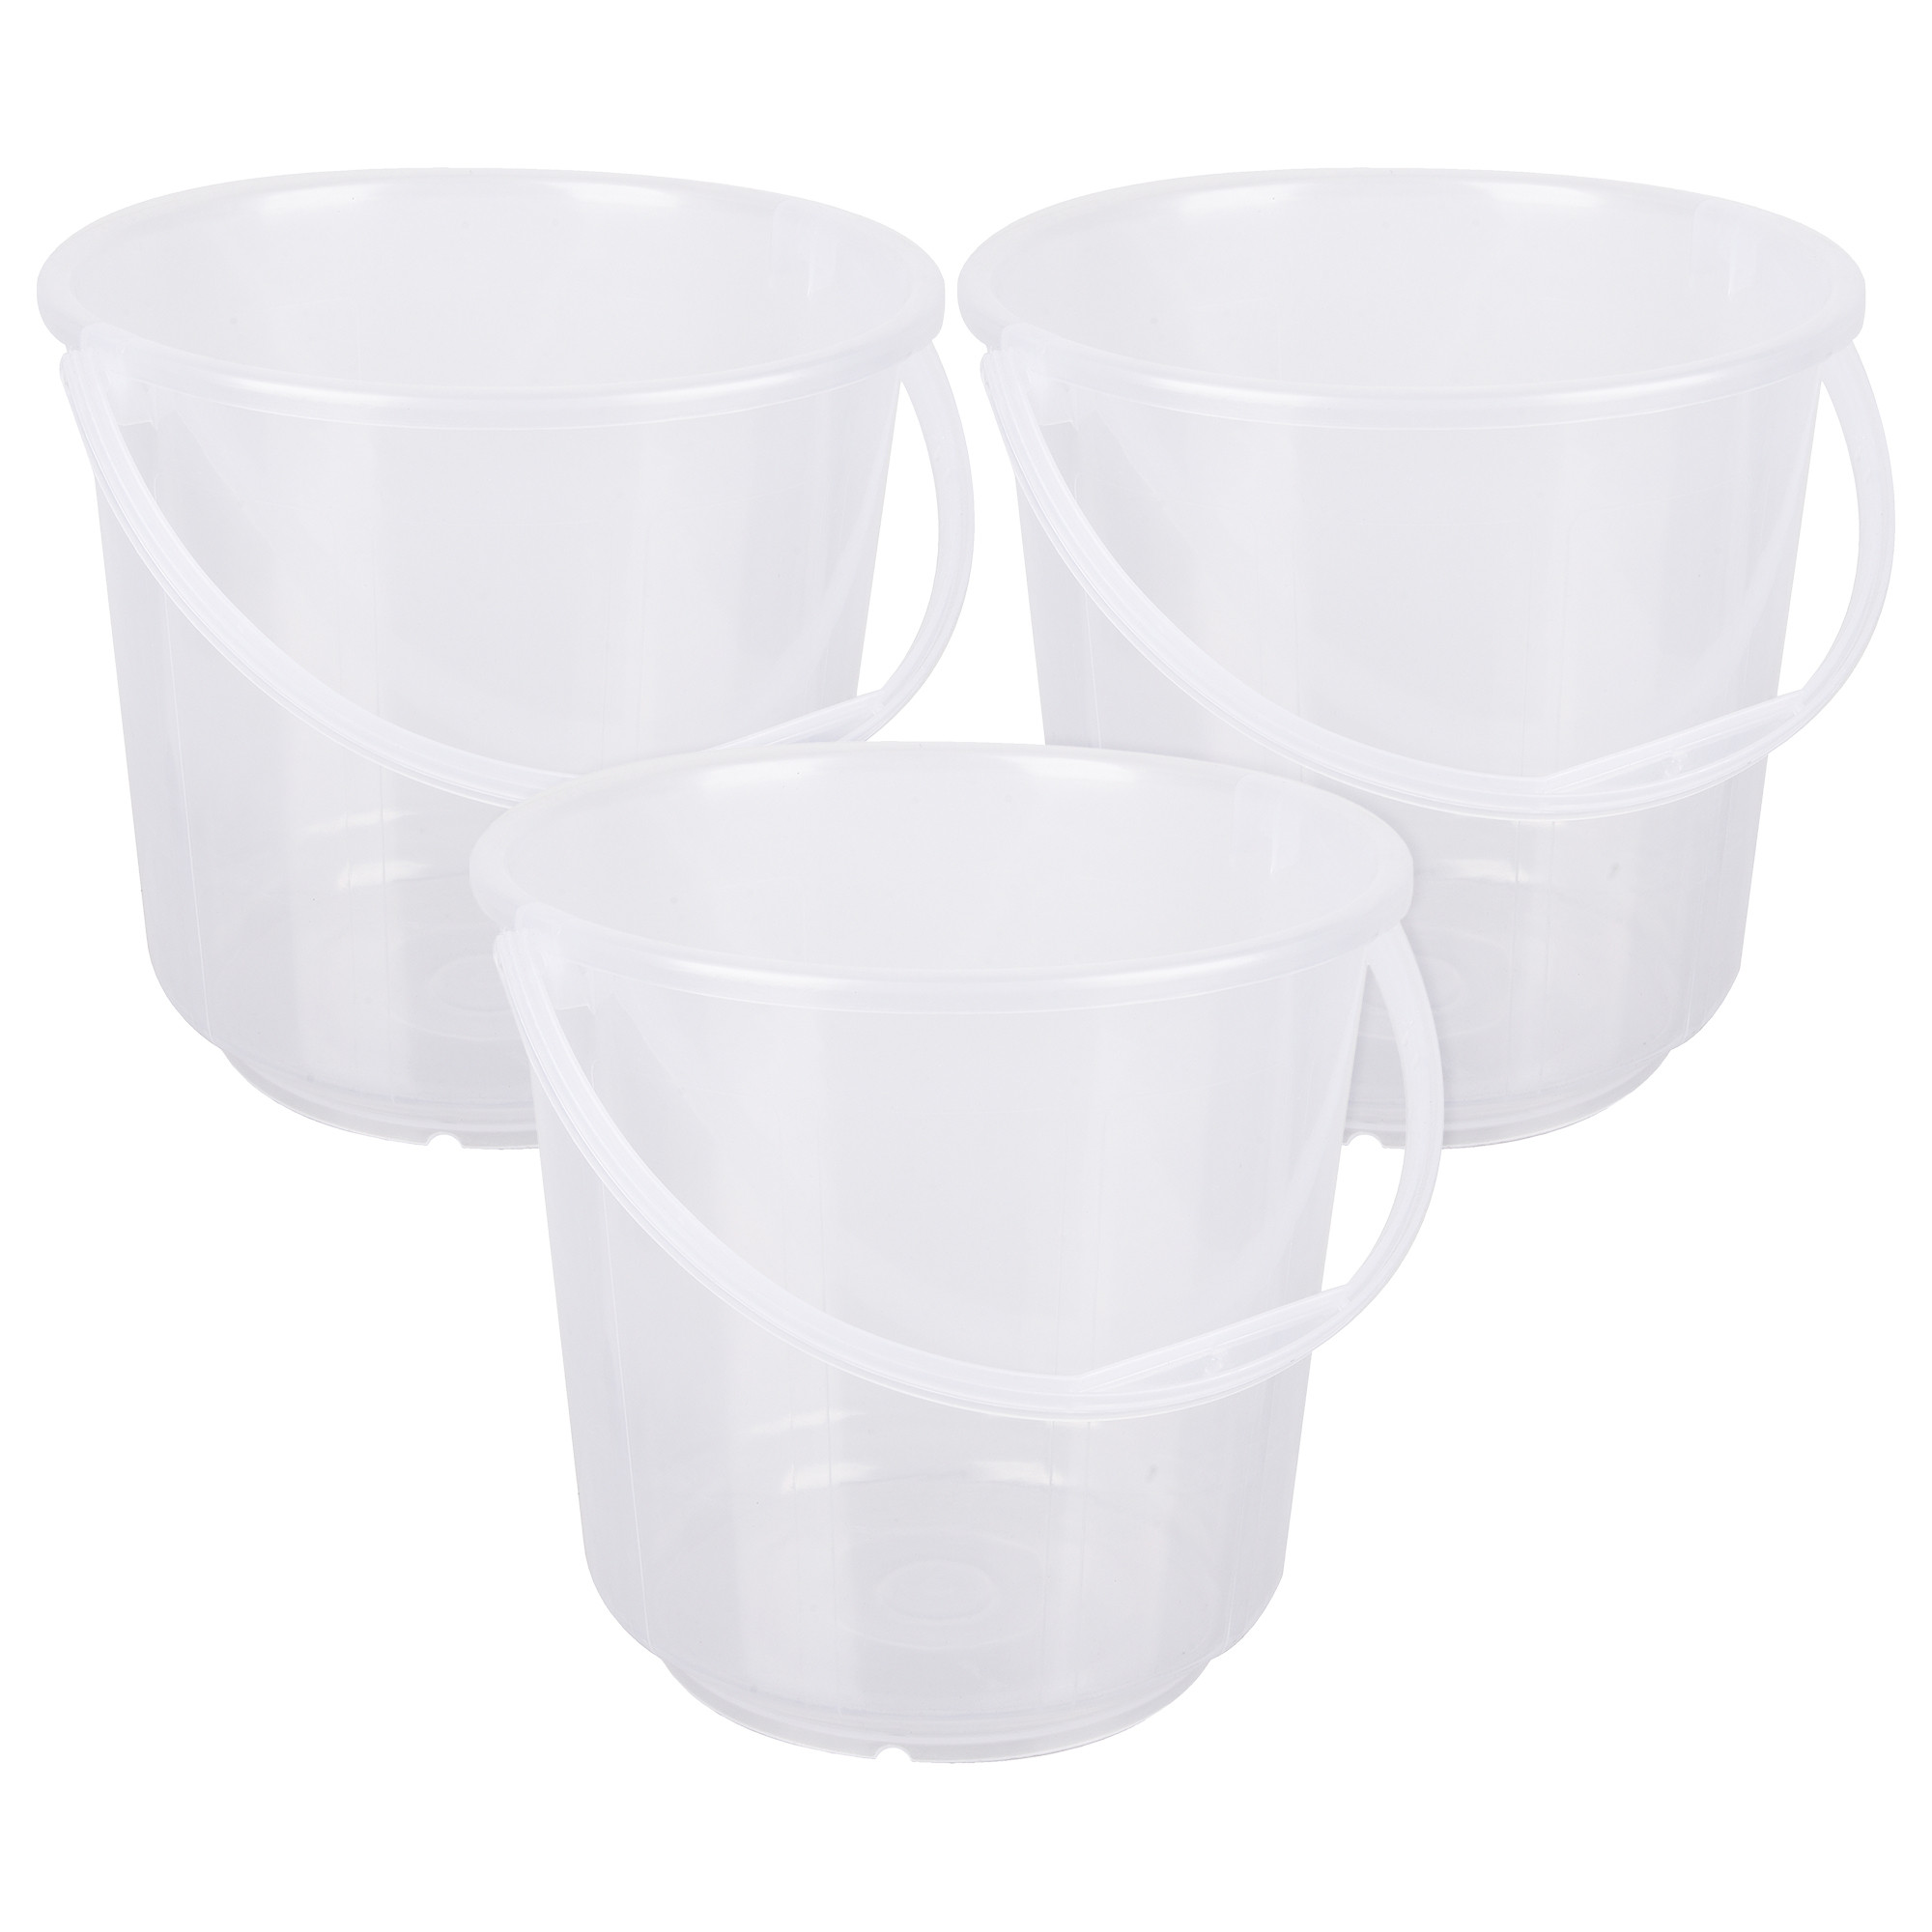 Kuber Industries Bucket | Plastic Bucket for Mopping | Bucket for Cleaning | Storage Container Bucket | Water Storage Bucket | Bathroom Bucket | Plain Bucket | 7 LTR | Transparent